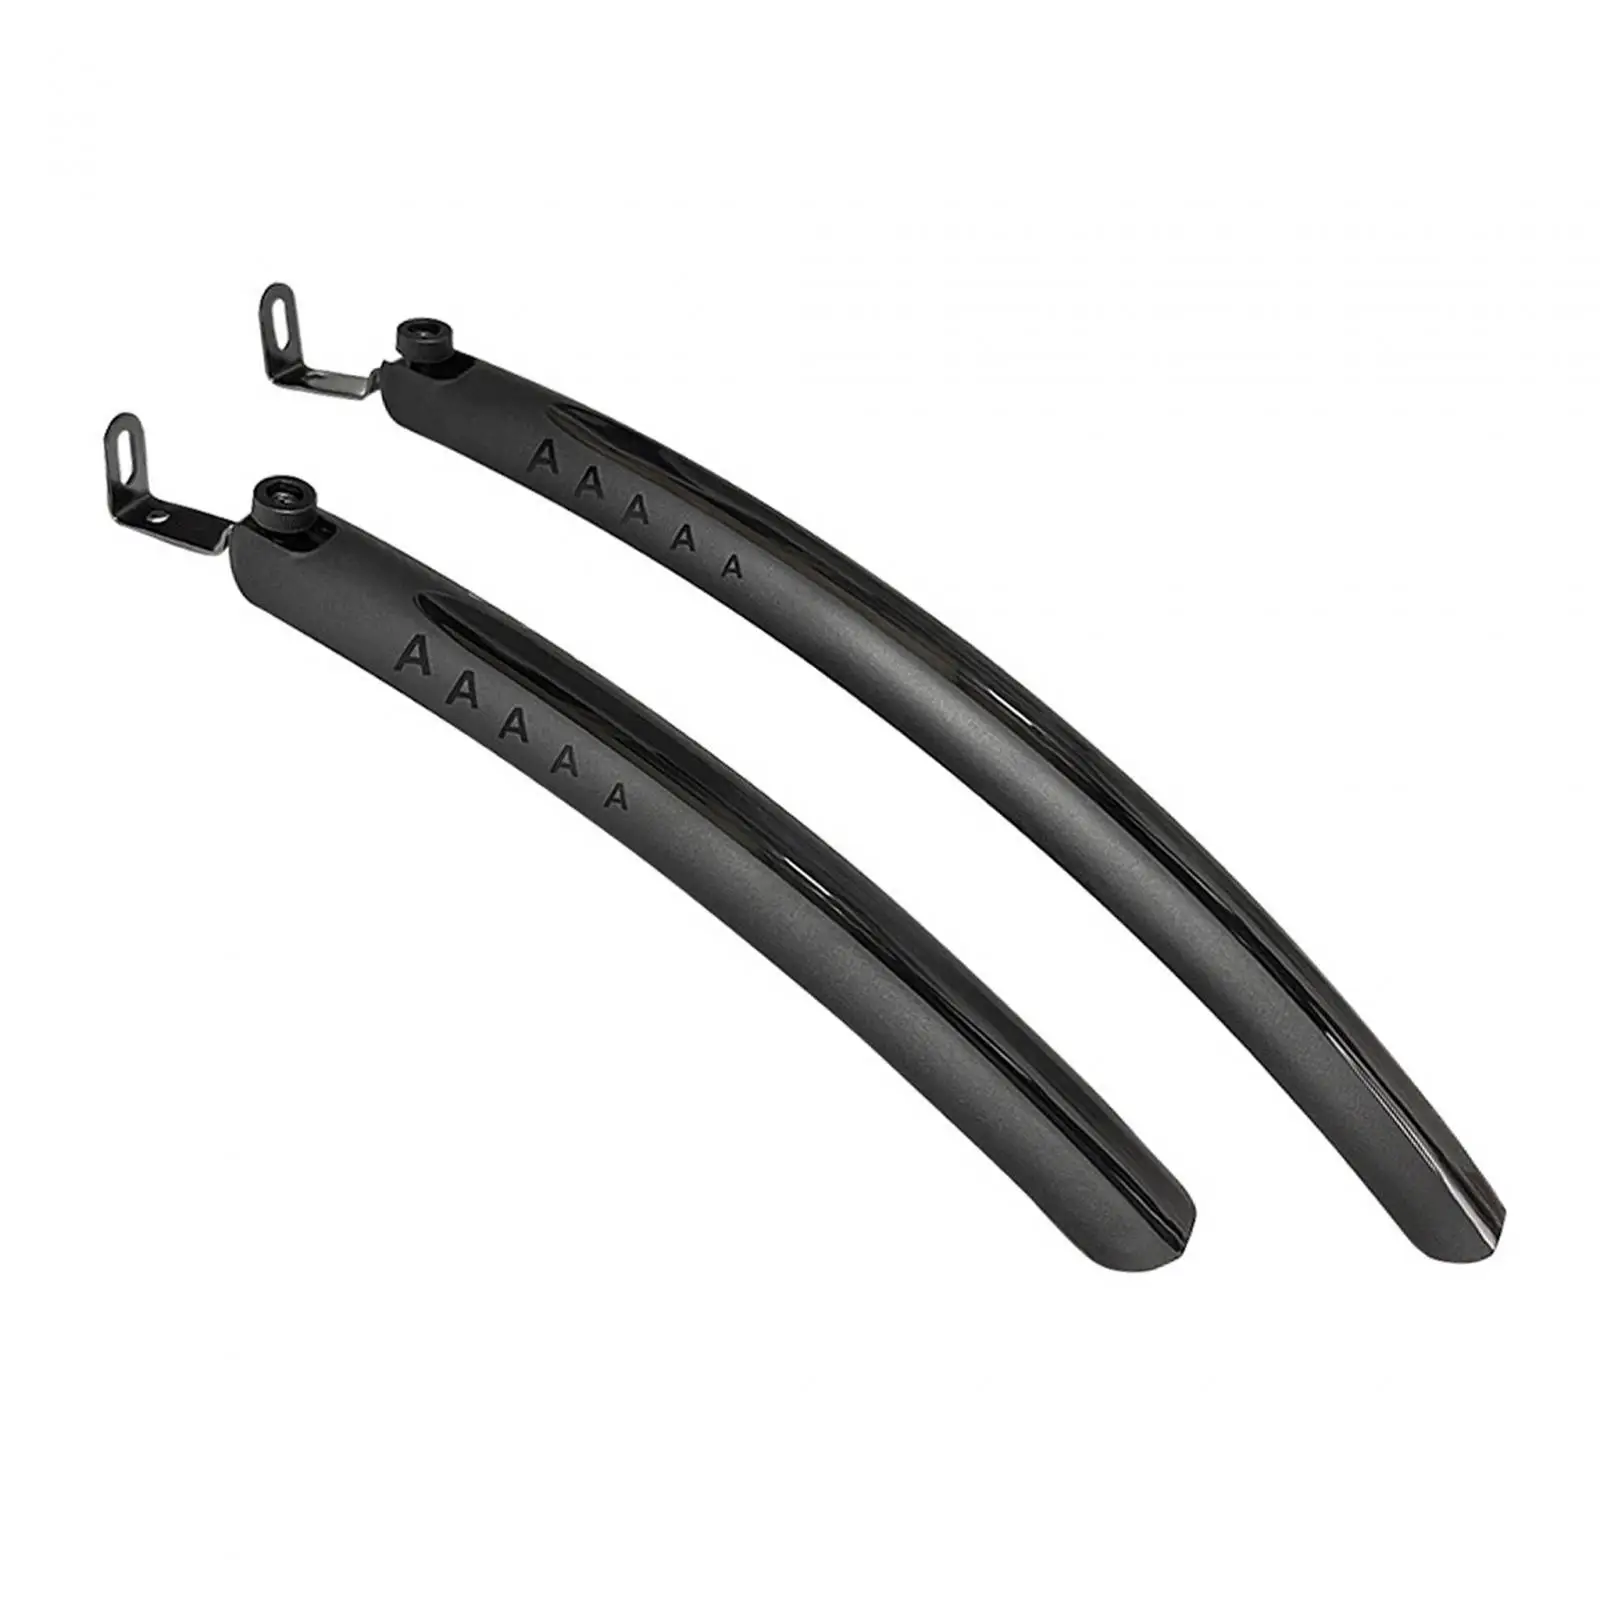 Bike Fenders Front and Rear Mud Guard Mudguards for 26